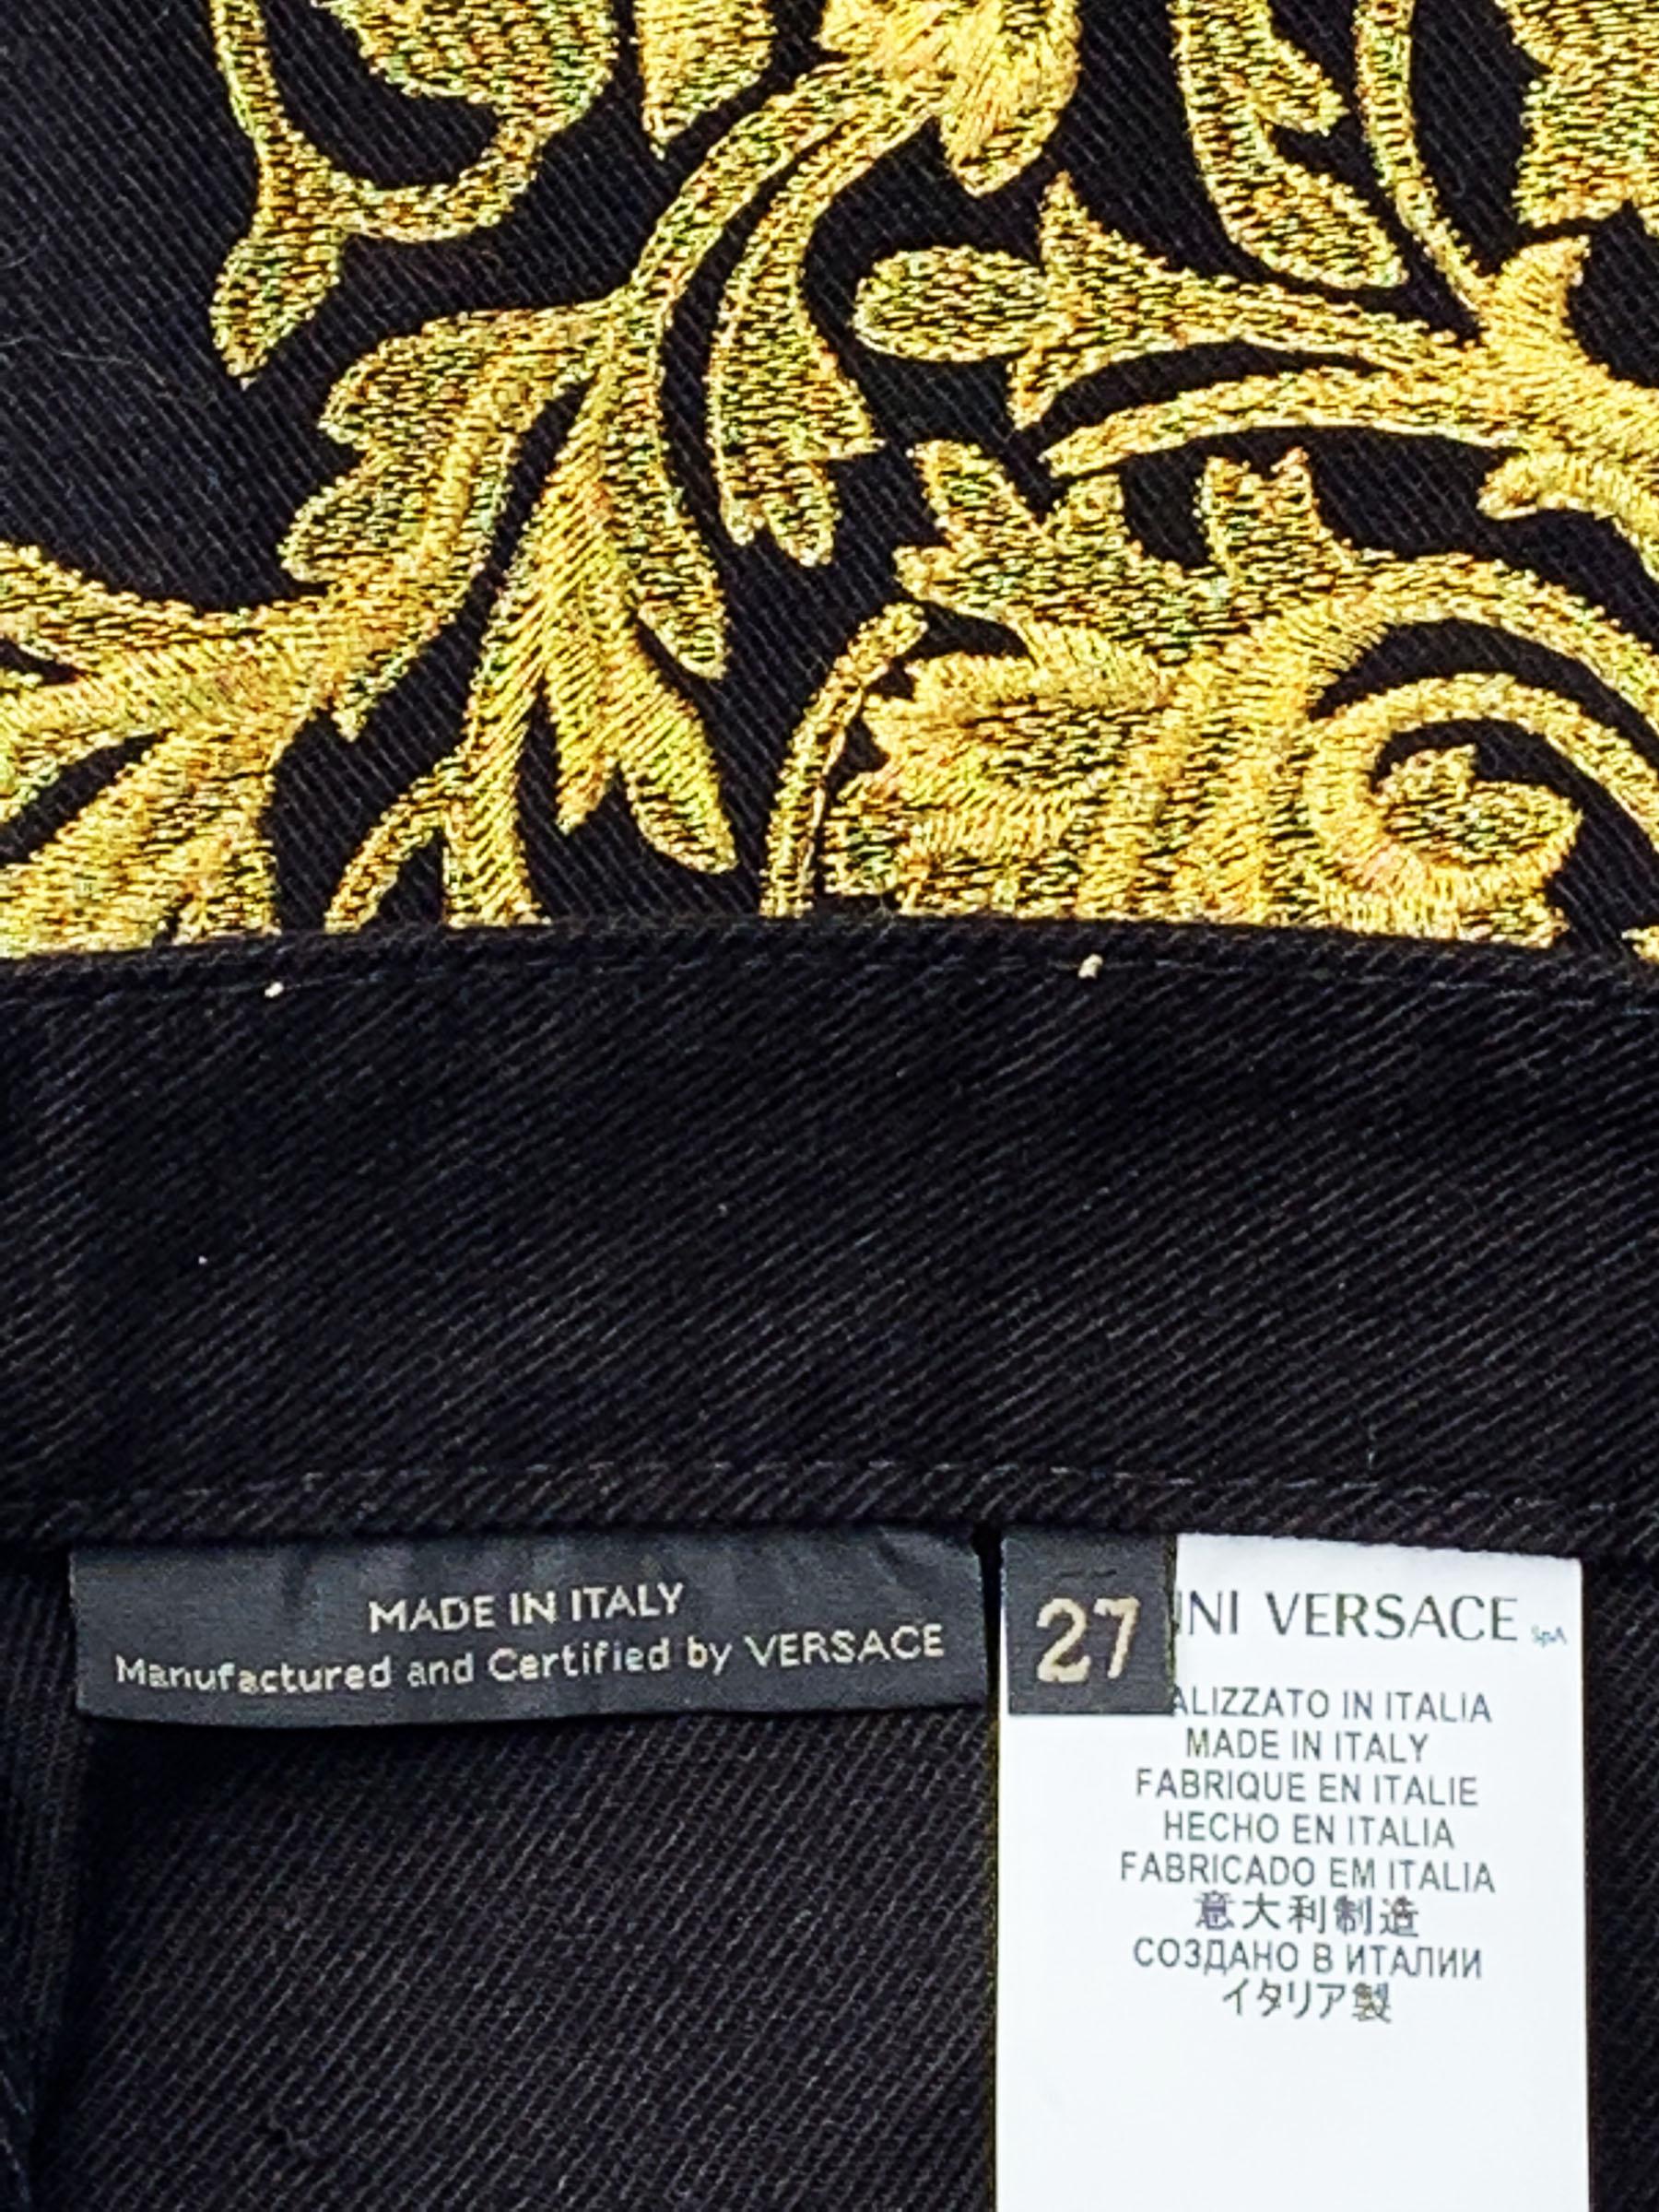 NWT Versace $2150 Black Gold Baroque Embroidery Stretch Jeans size 27 and 26 For Sale 5